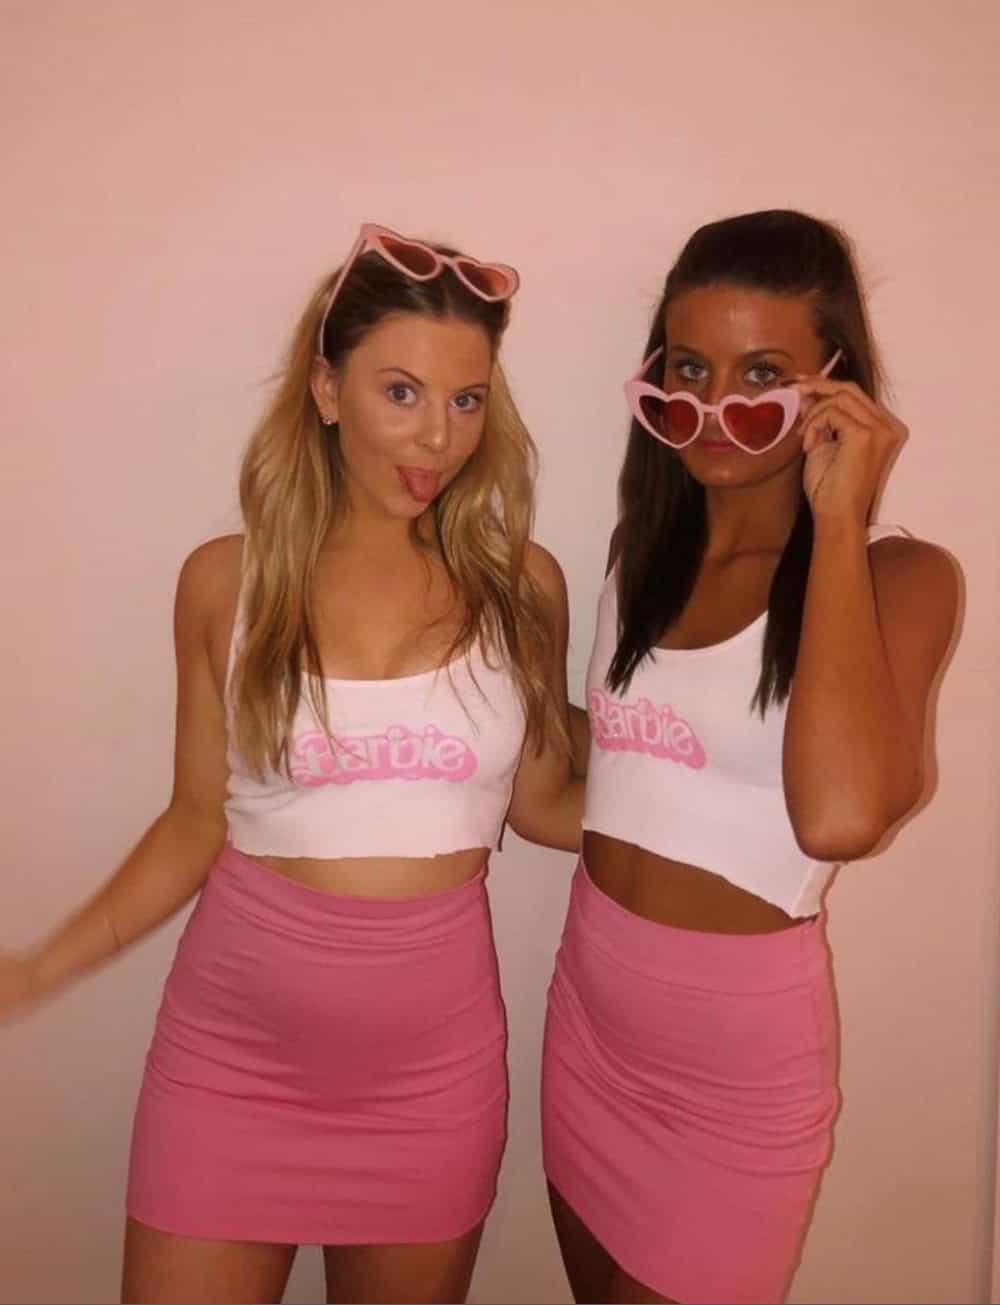 Two women dressed up as Barbie on Halloween.